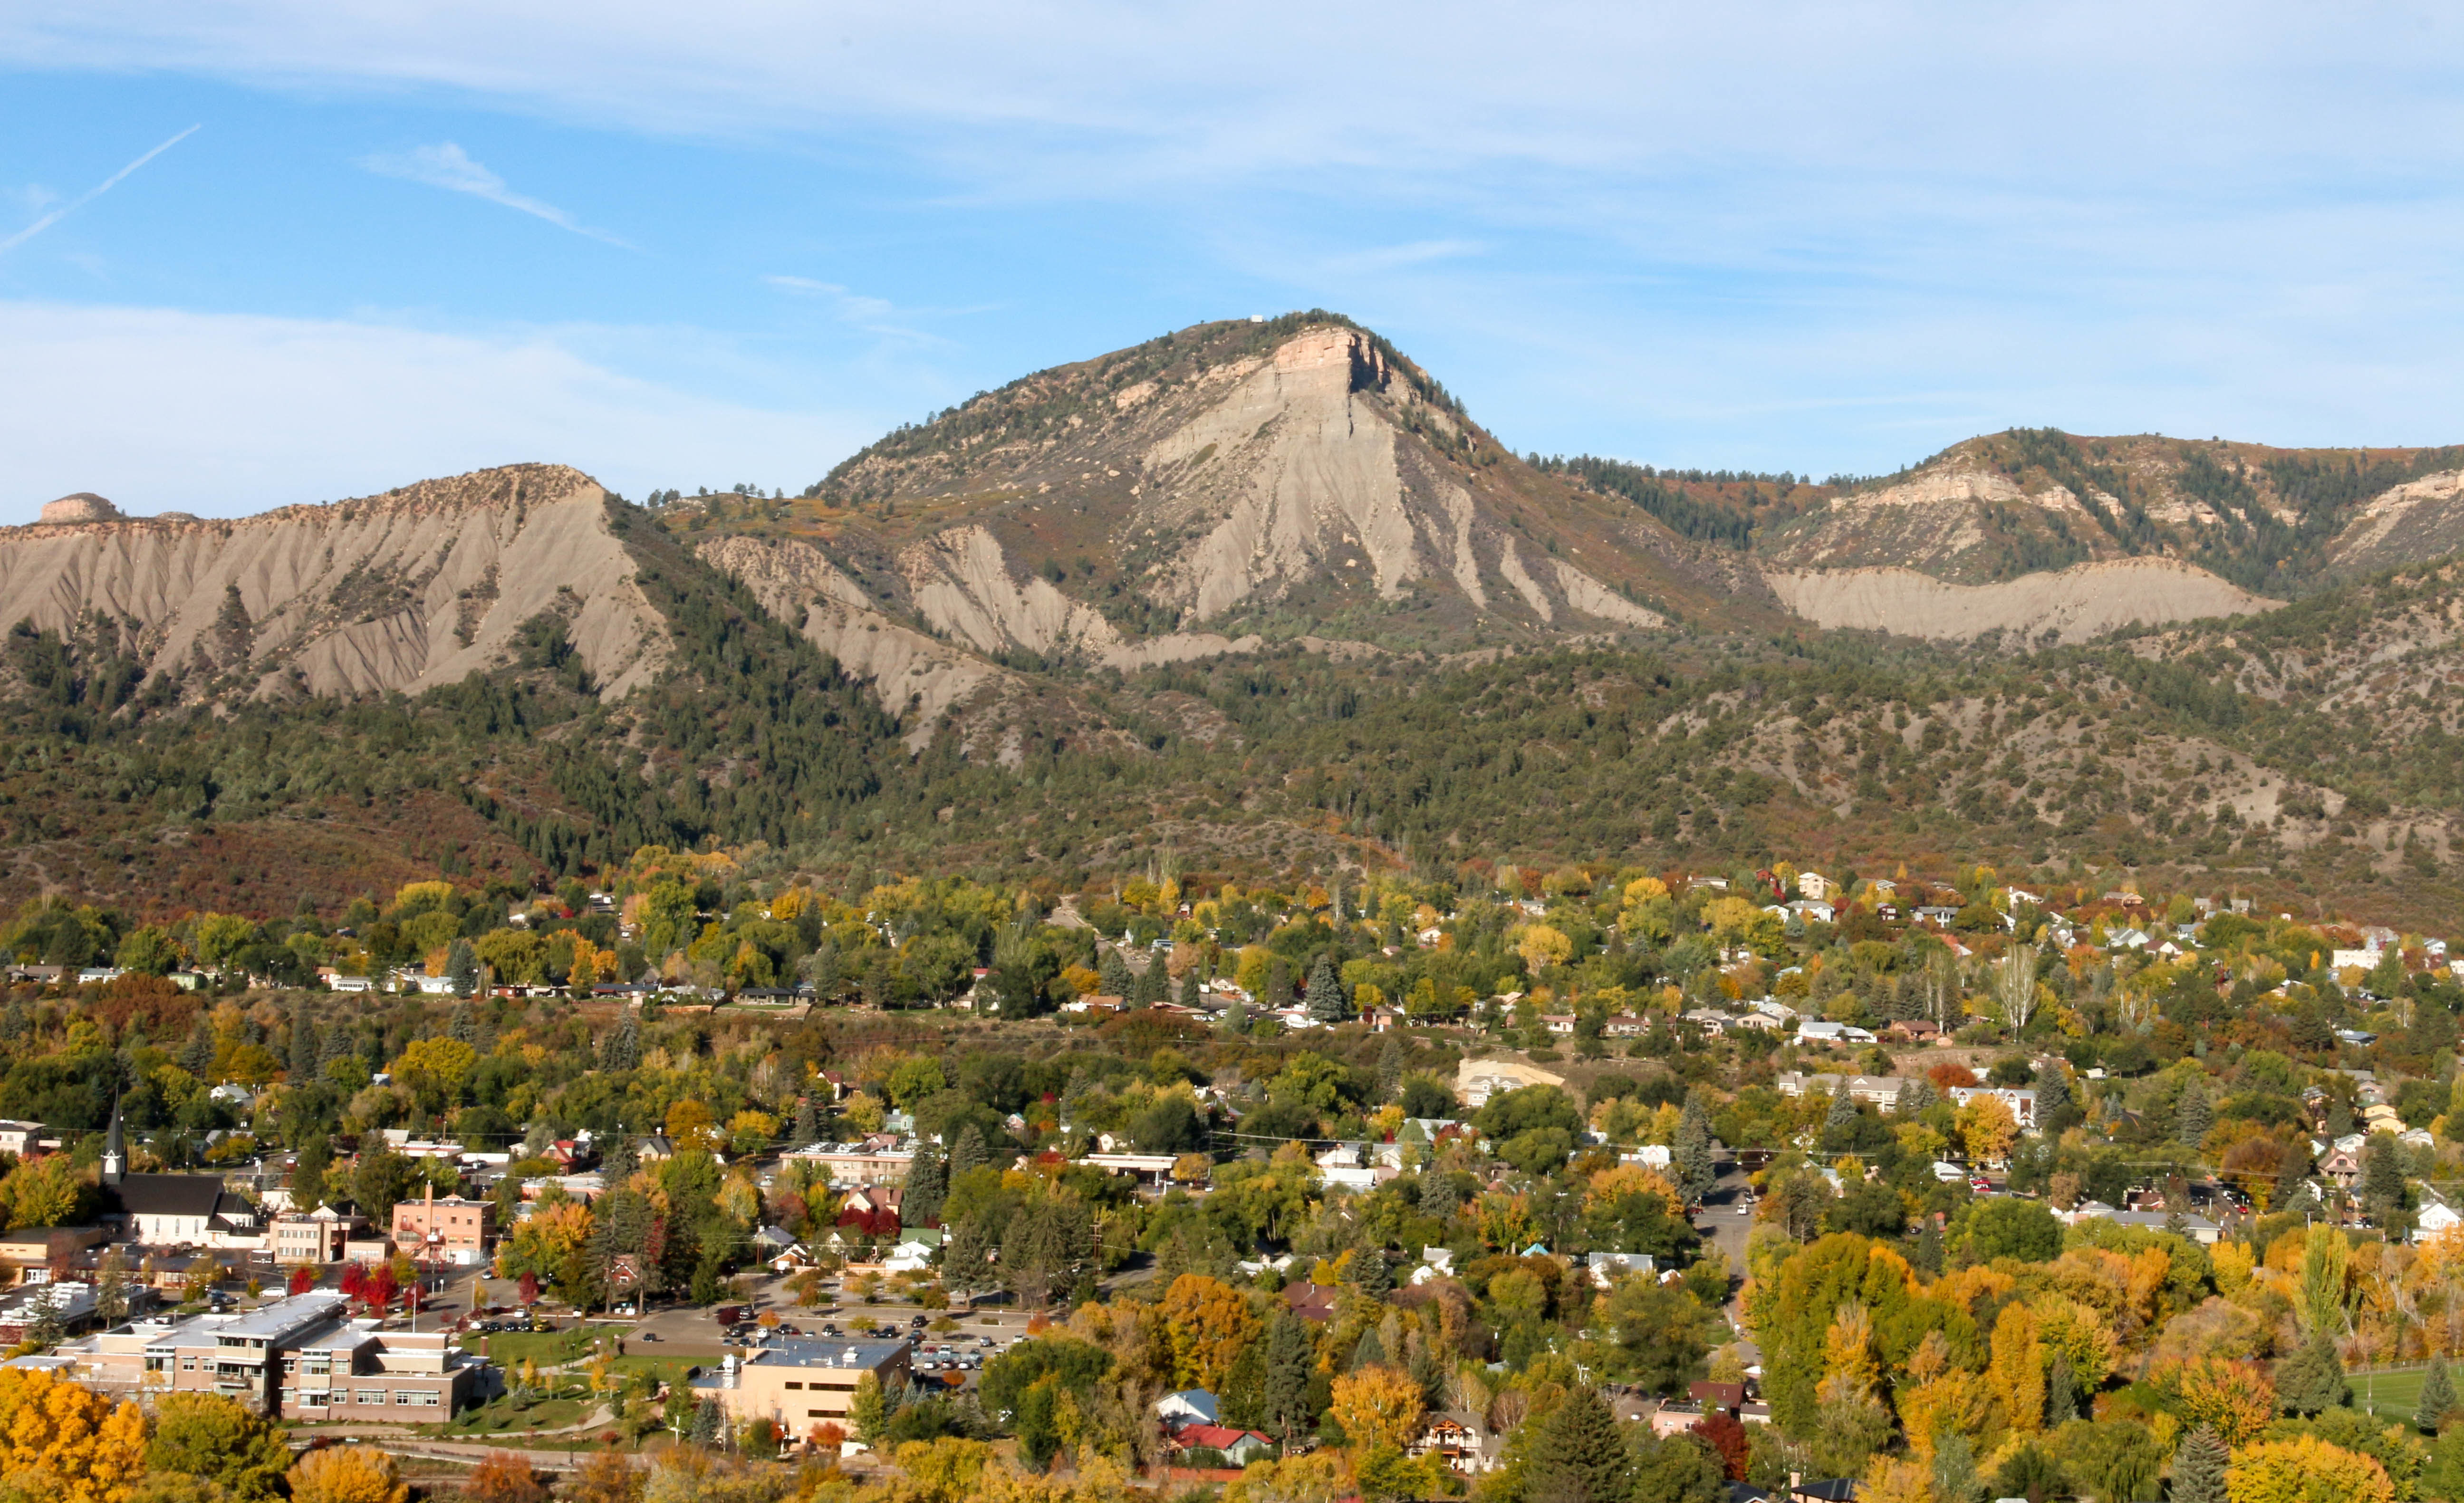 Durango, CO in the Autumn viewed from overhead